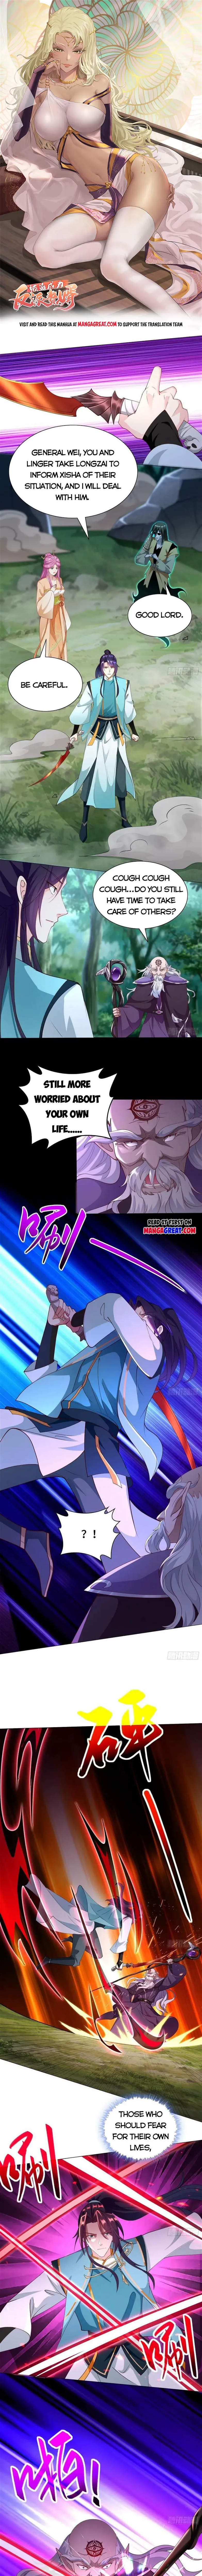 Forced to Become the Villain's Son-in-law Chapter 426 page 1 - MangaWeebs.in